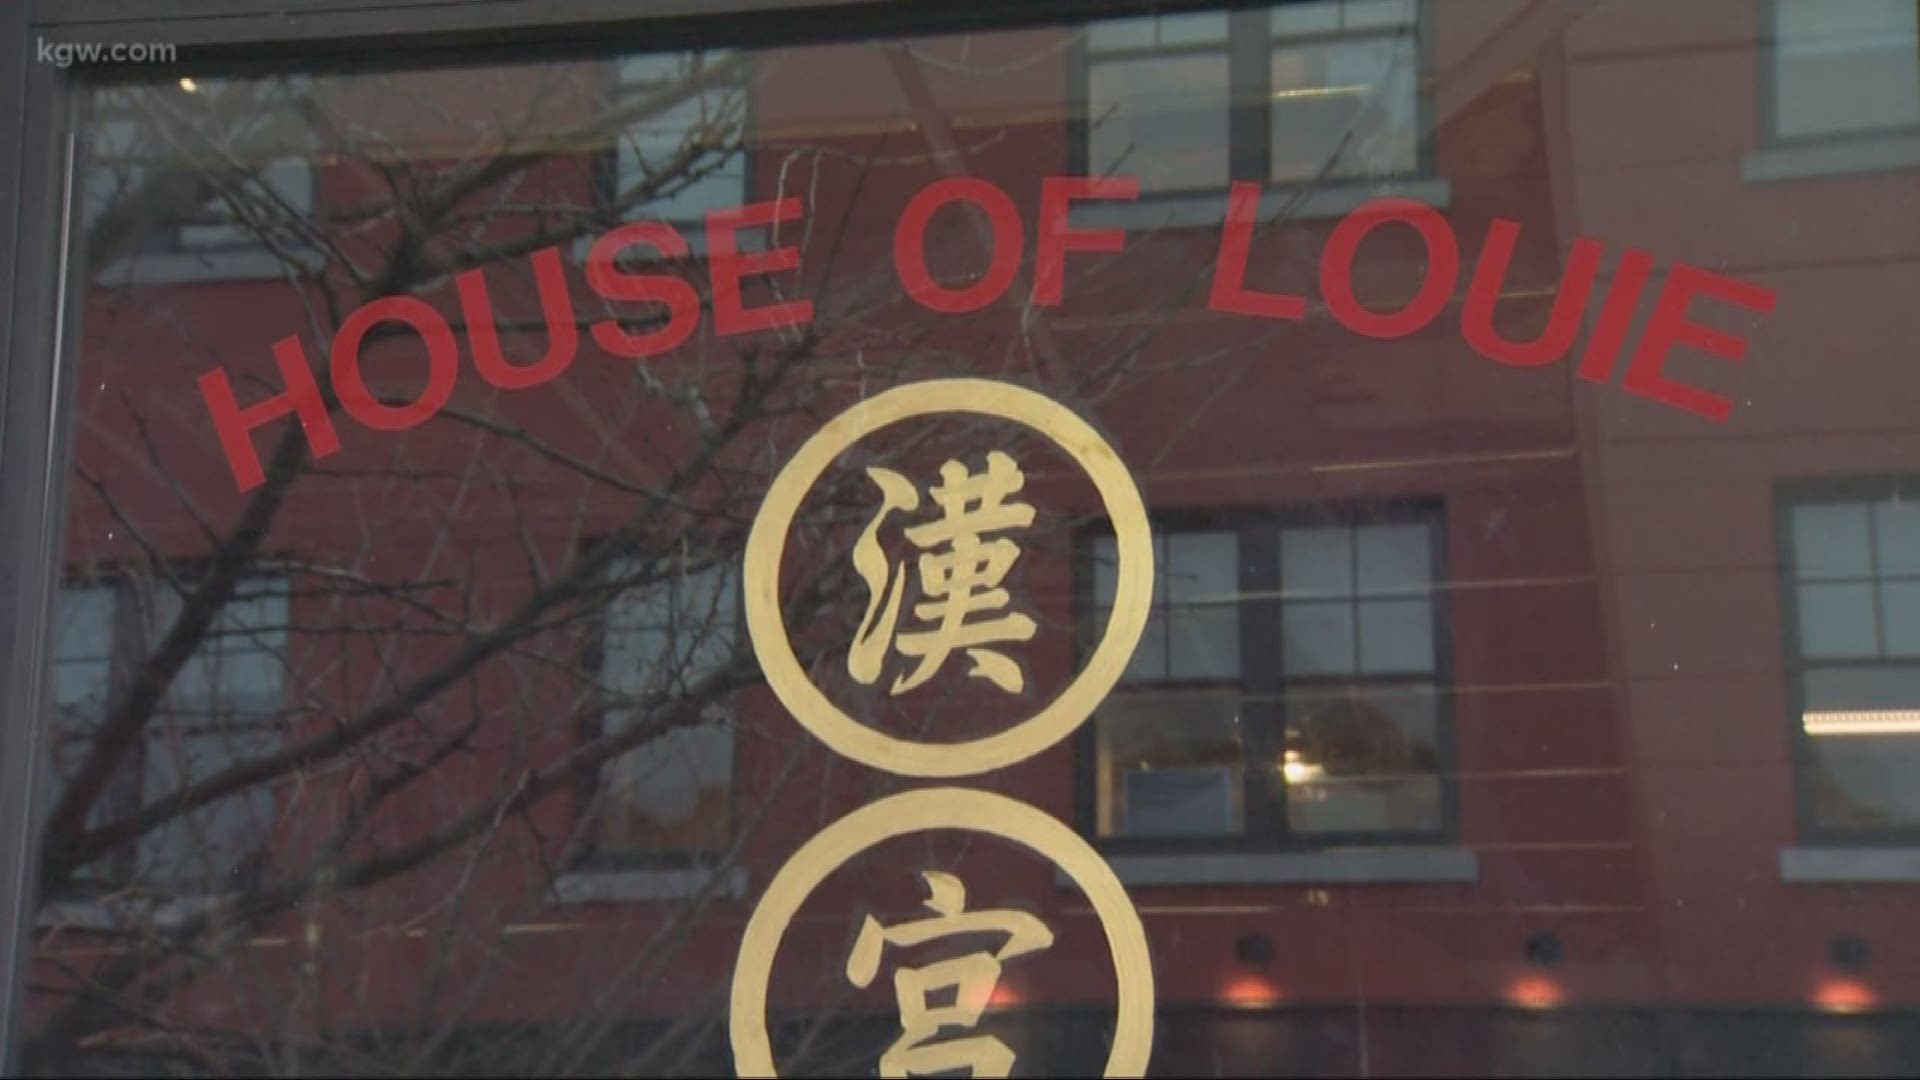 House of Louie in Chinatown closes